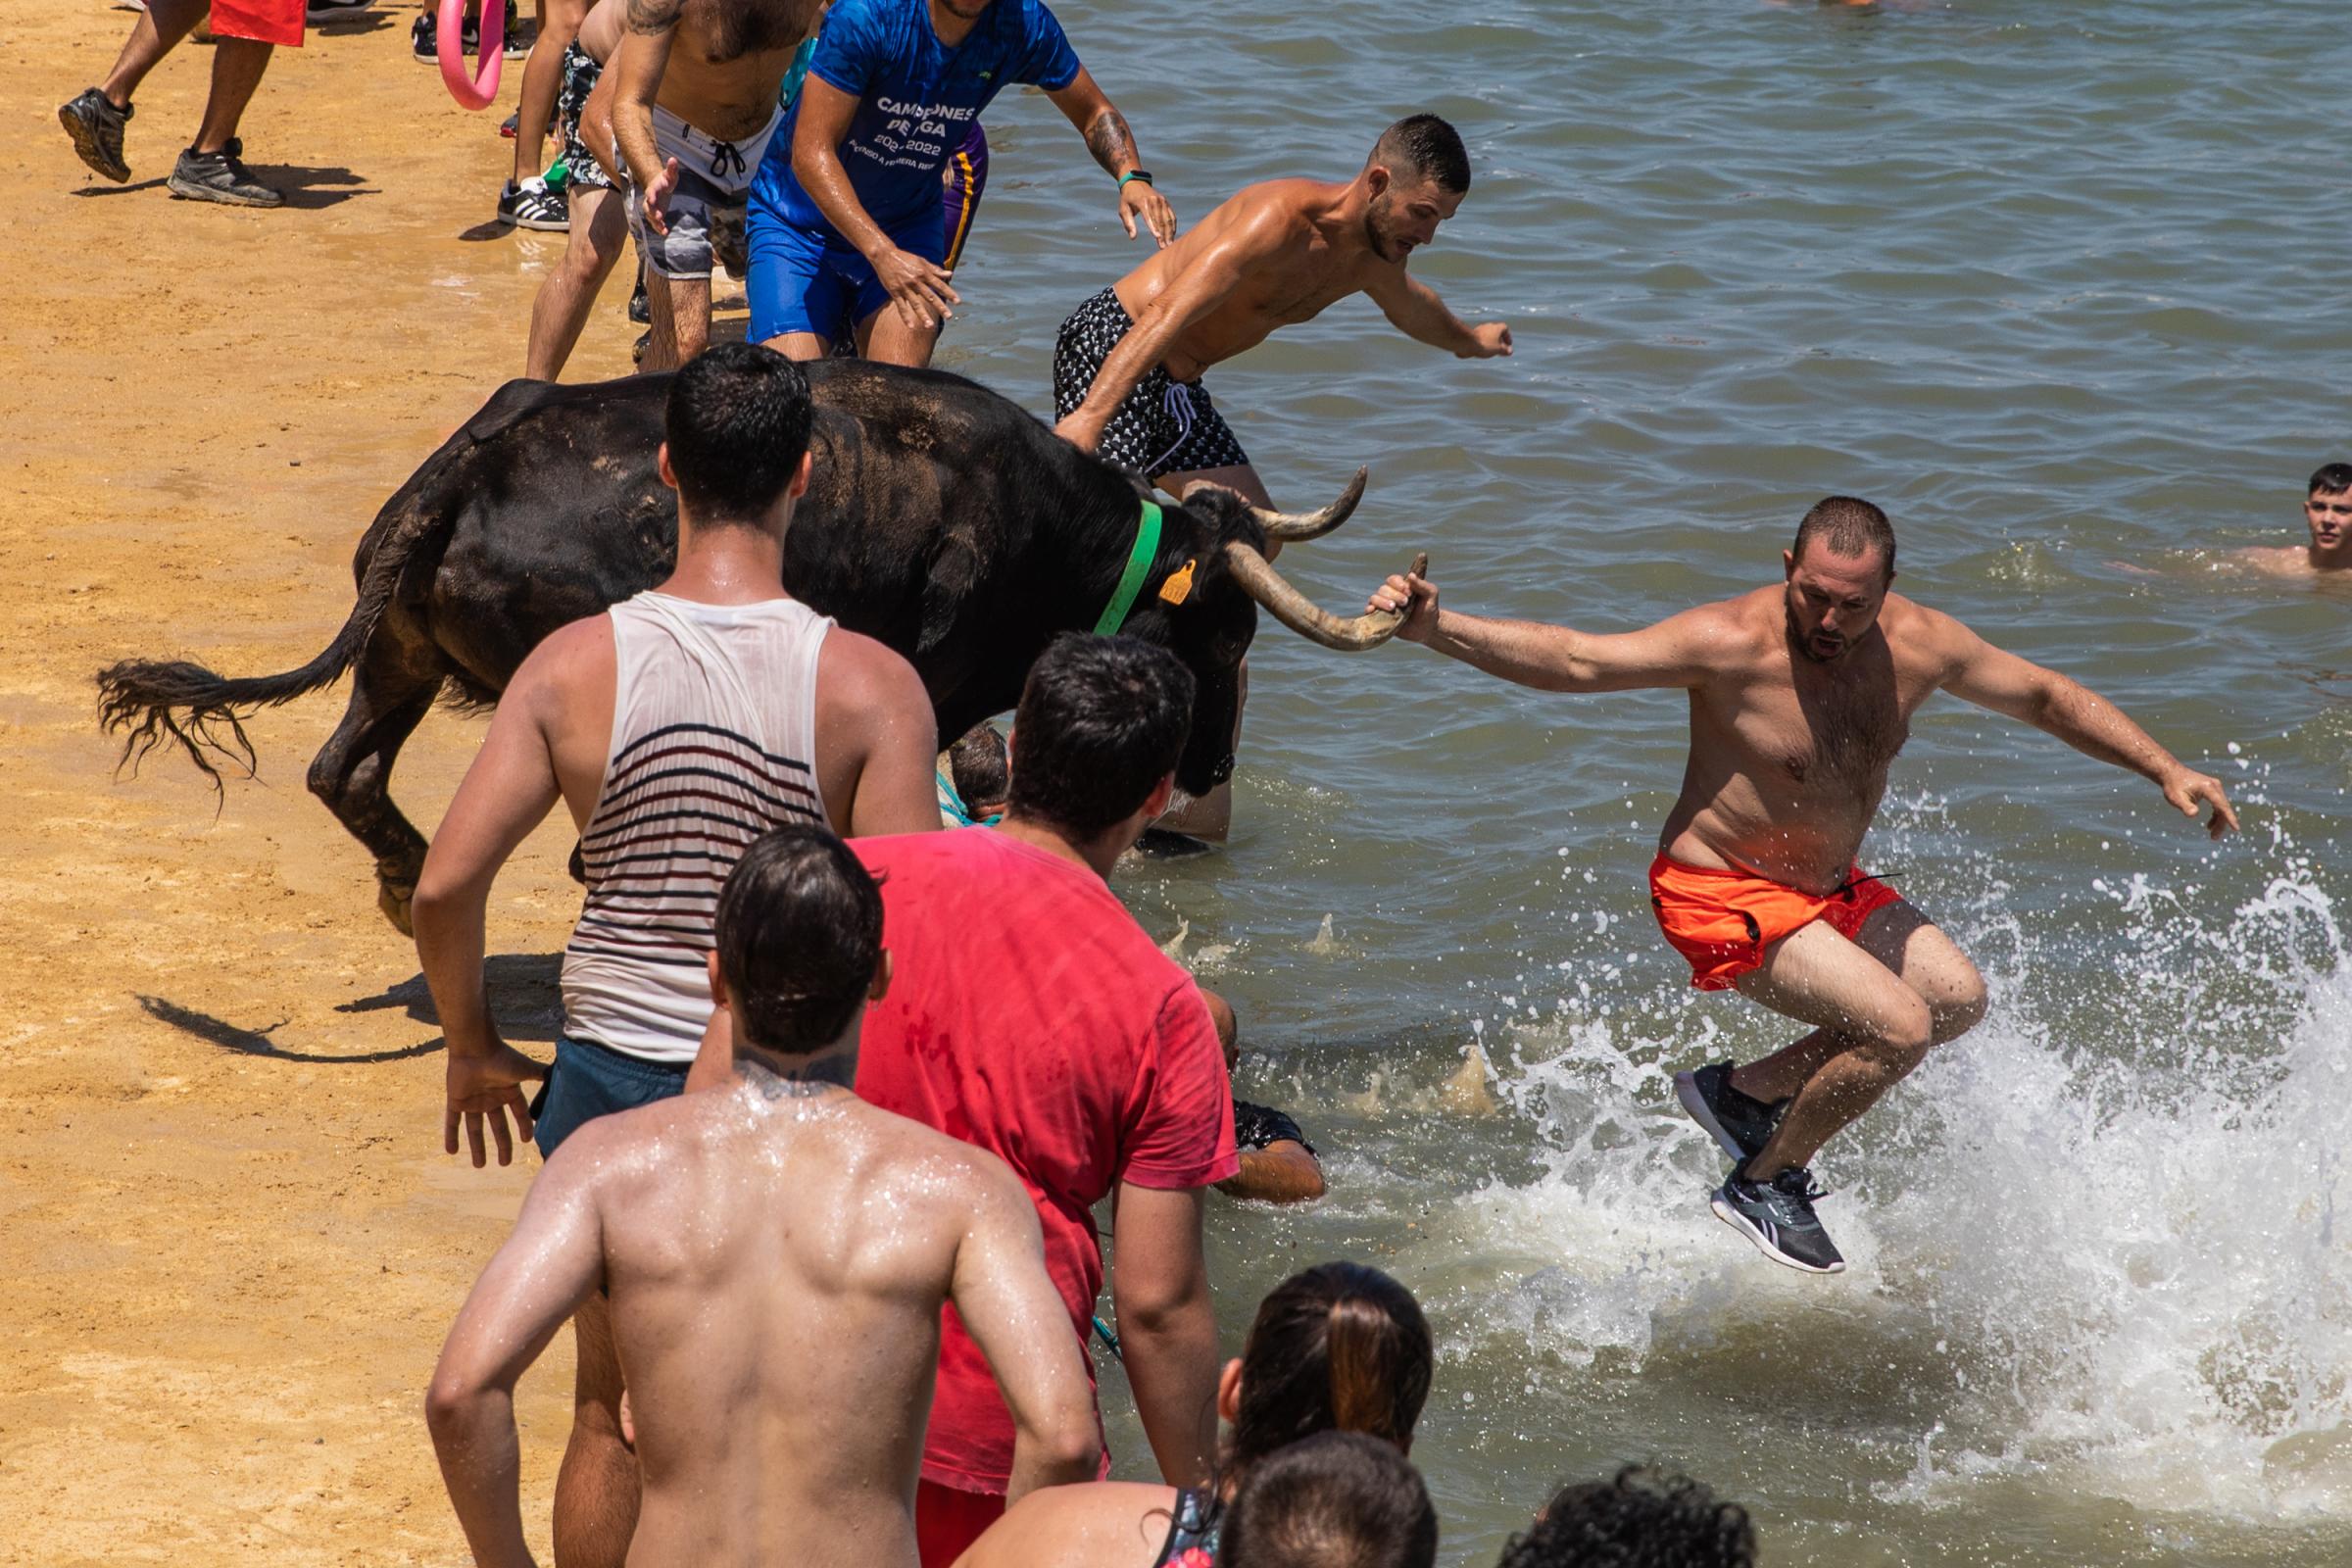 At 'Bous A La Mar', Revelers Take Plunge To Dodge Bulls And Beat The Heat - DENIA, SPAIN - JULY 17: A participant in the running of...